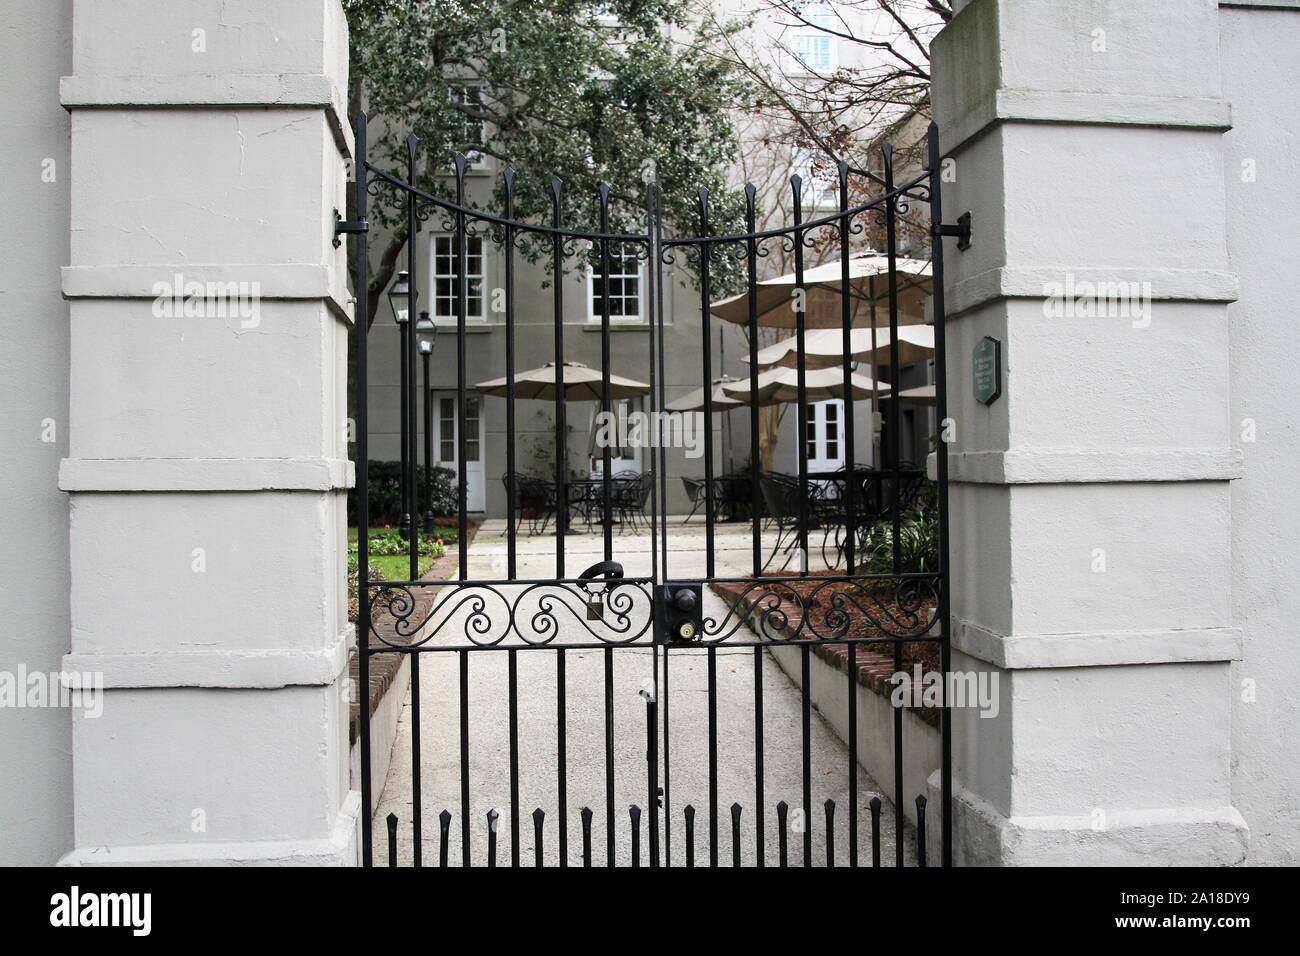 Save Download Preview  Luxury residential house with metal gate in front. Stock Photo